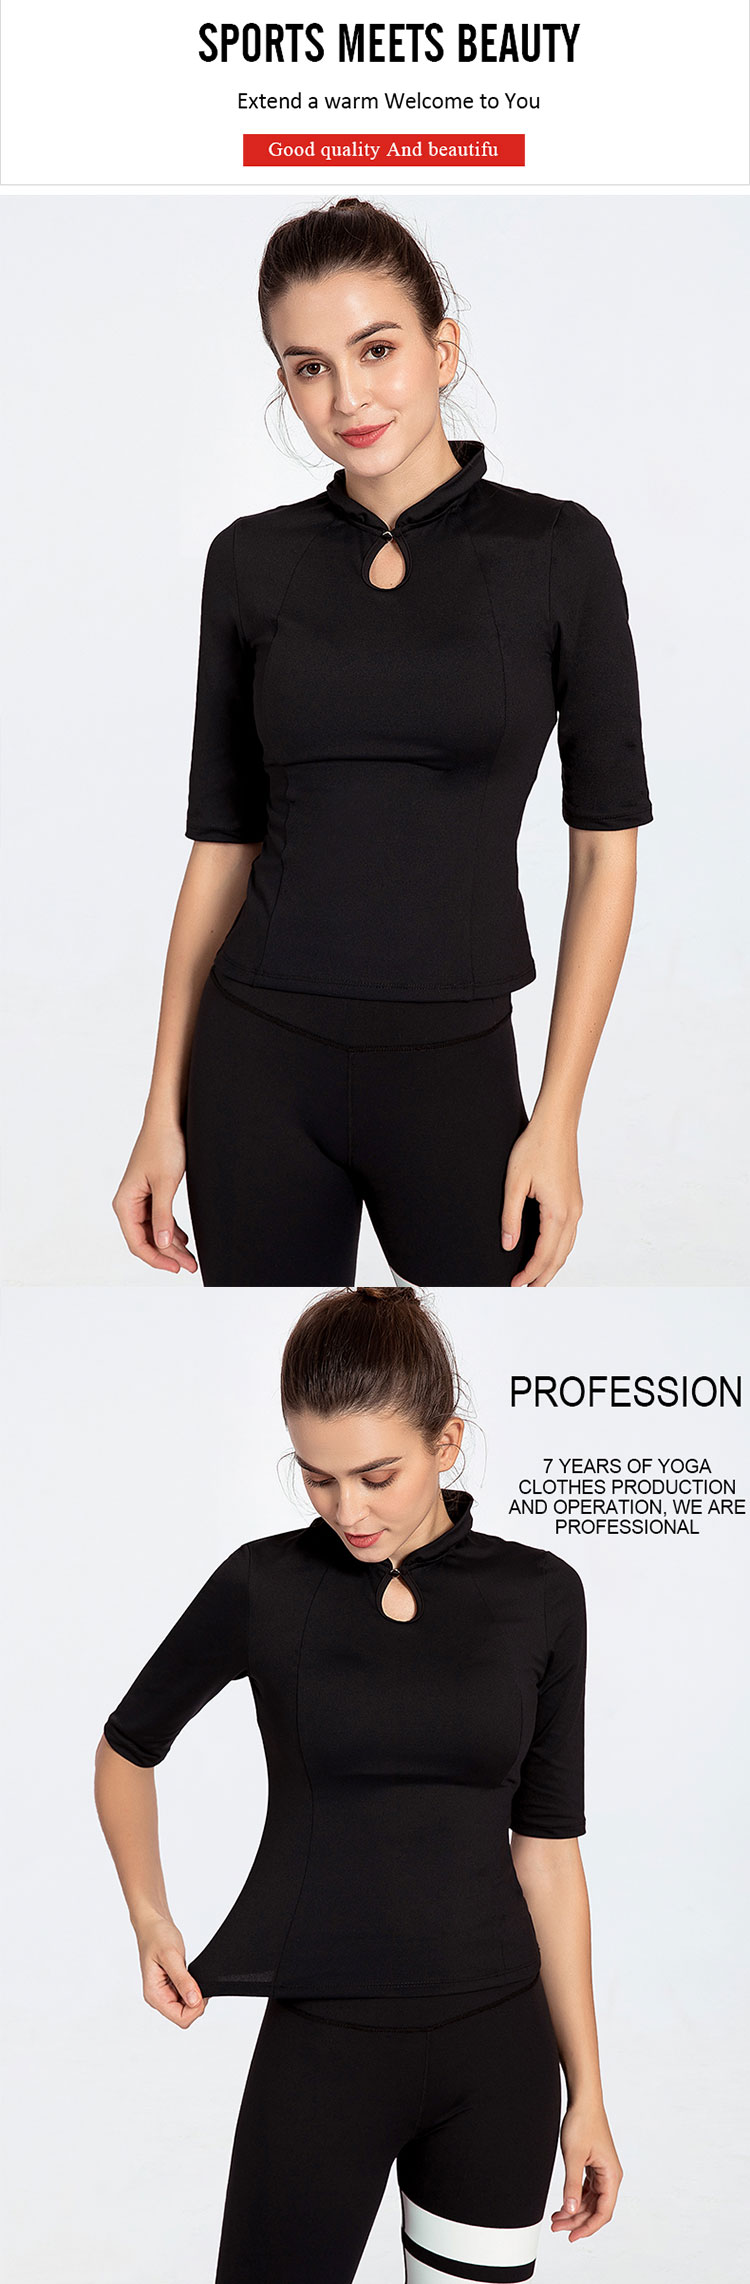 Profession-7-years-of-yoga-clothes-production-and-operation.-we-are-professional